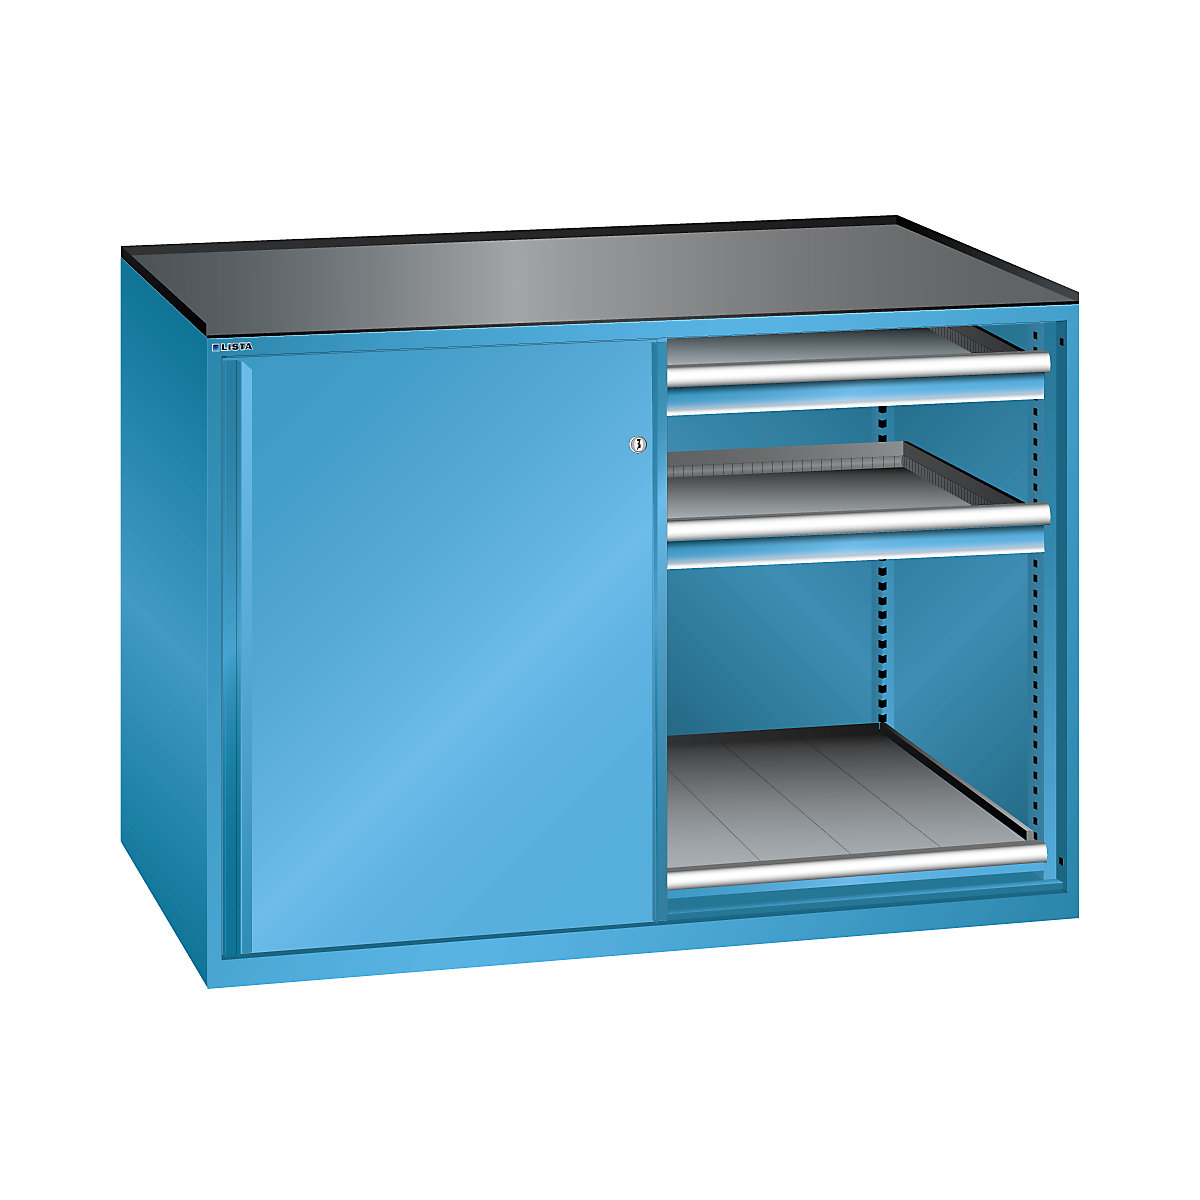 Sliding door cupboard, max. load of pull-out shelf 200 kg - LISTA